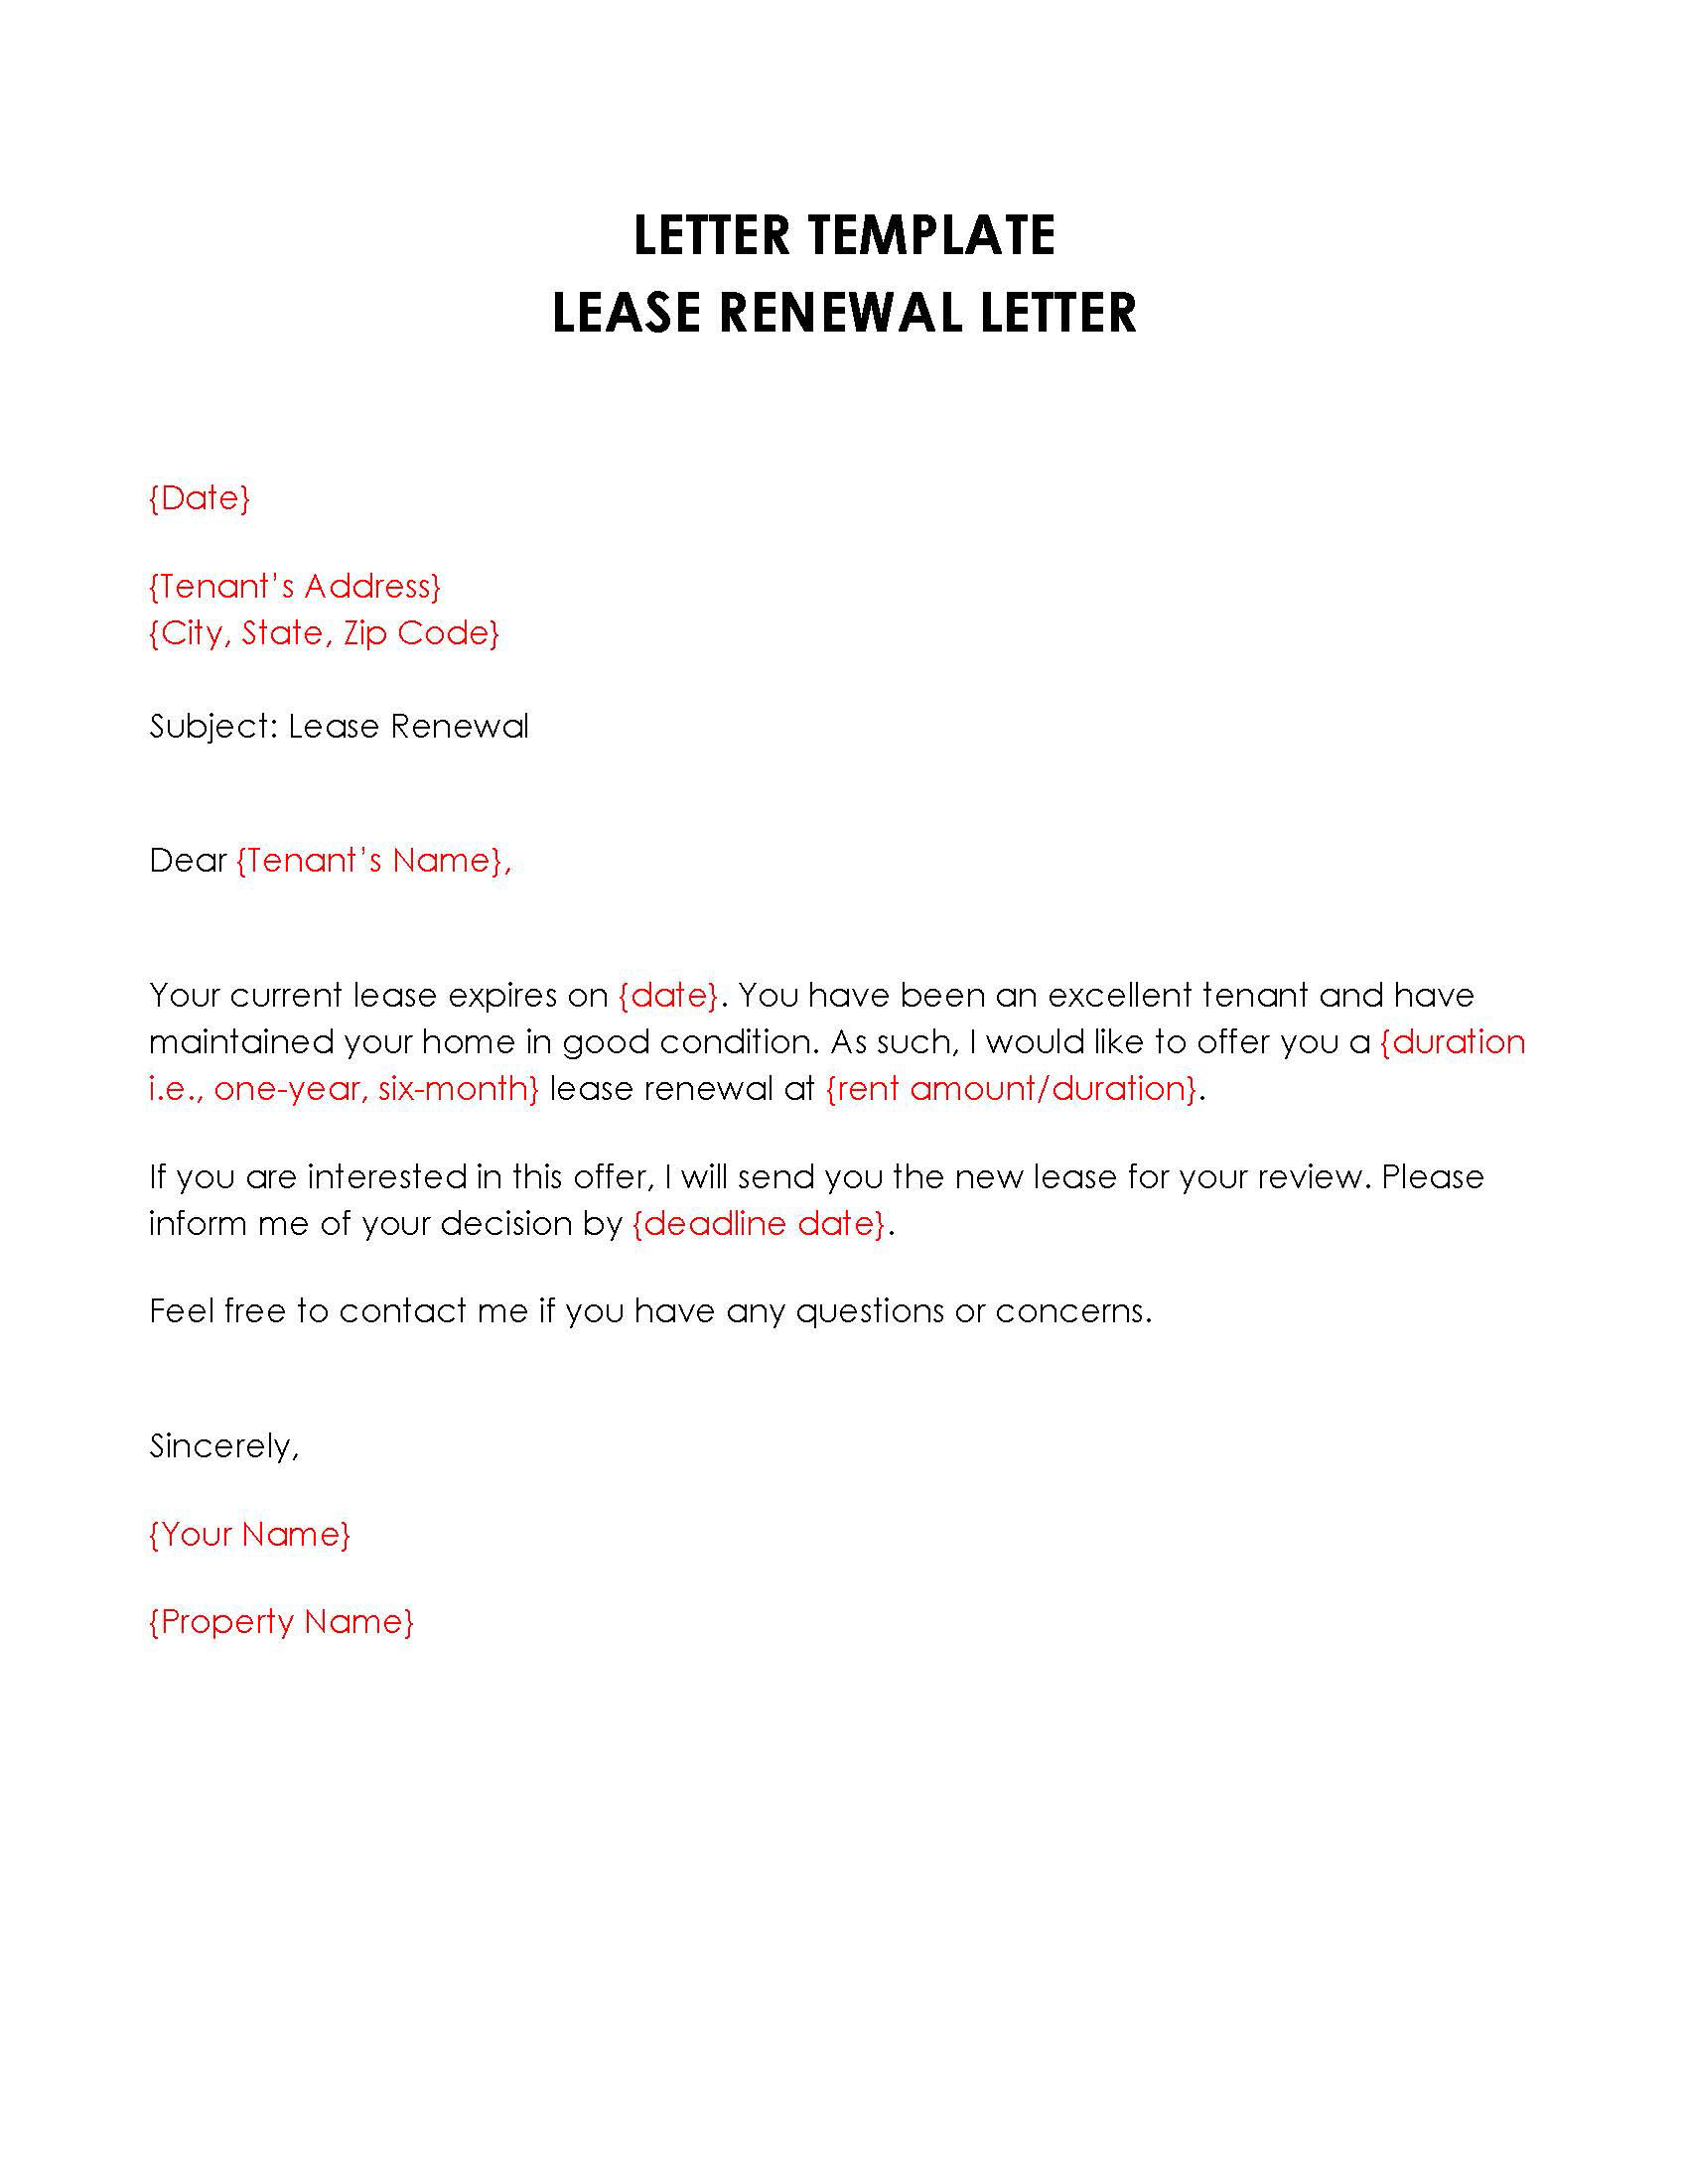 Professional Editable Lease Renewal Letter Template 06 for Word Document